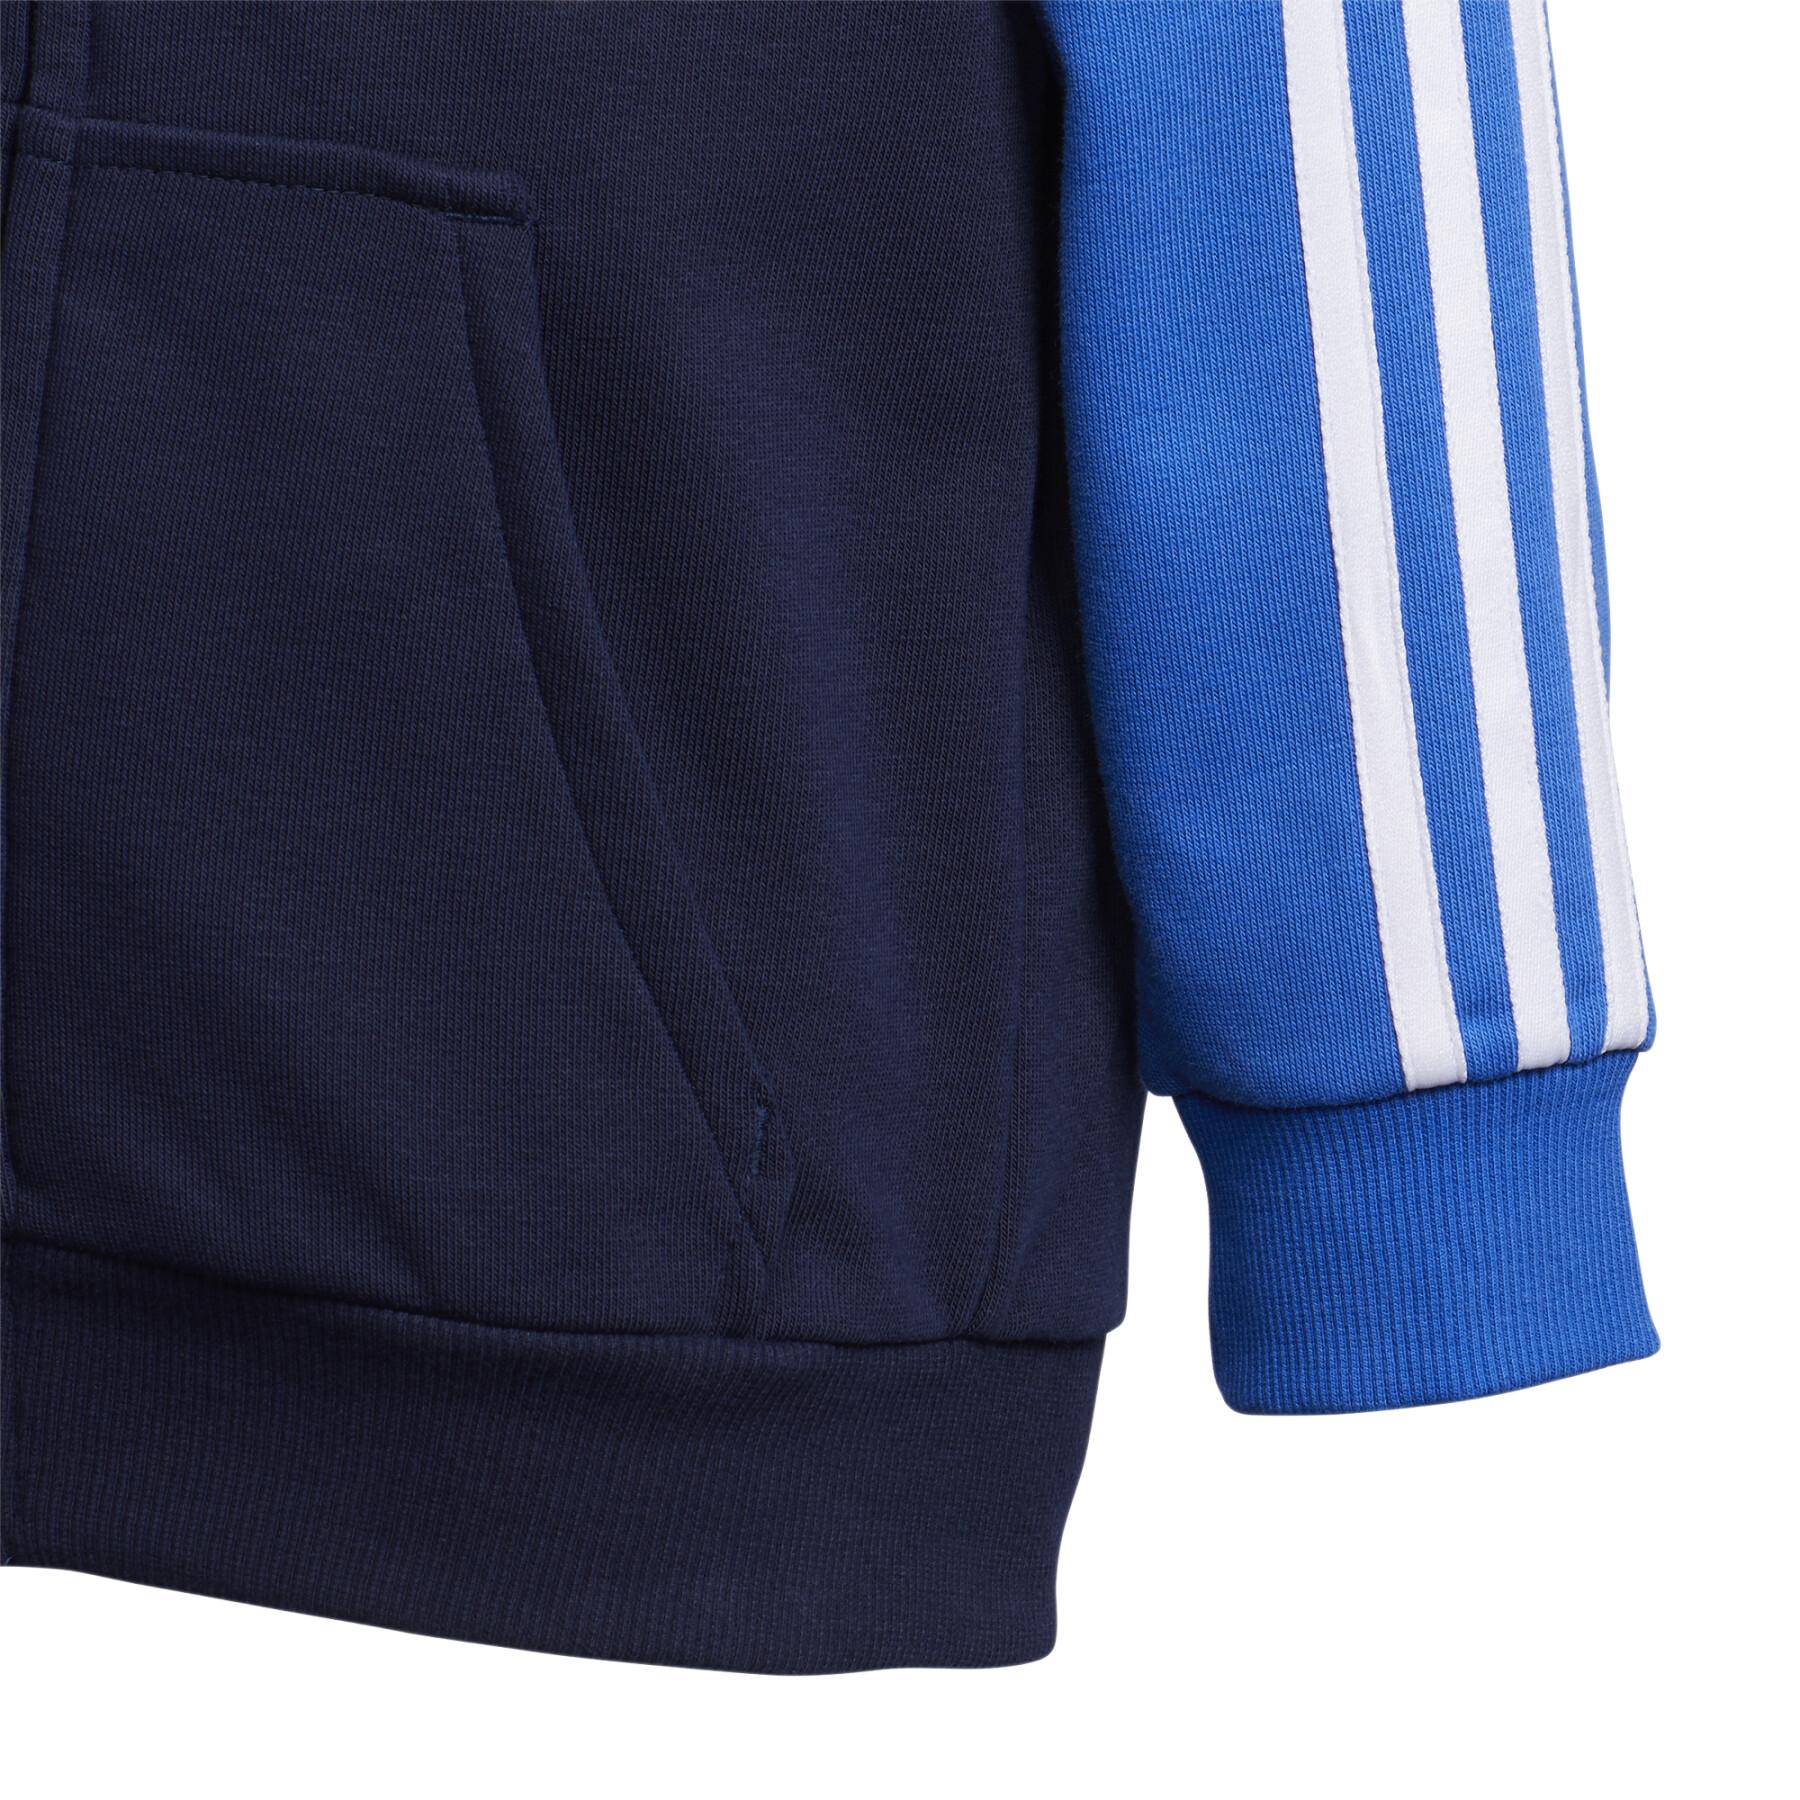 Tracksuit kid adidas French Terry